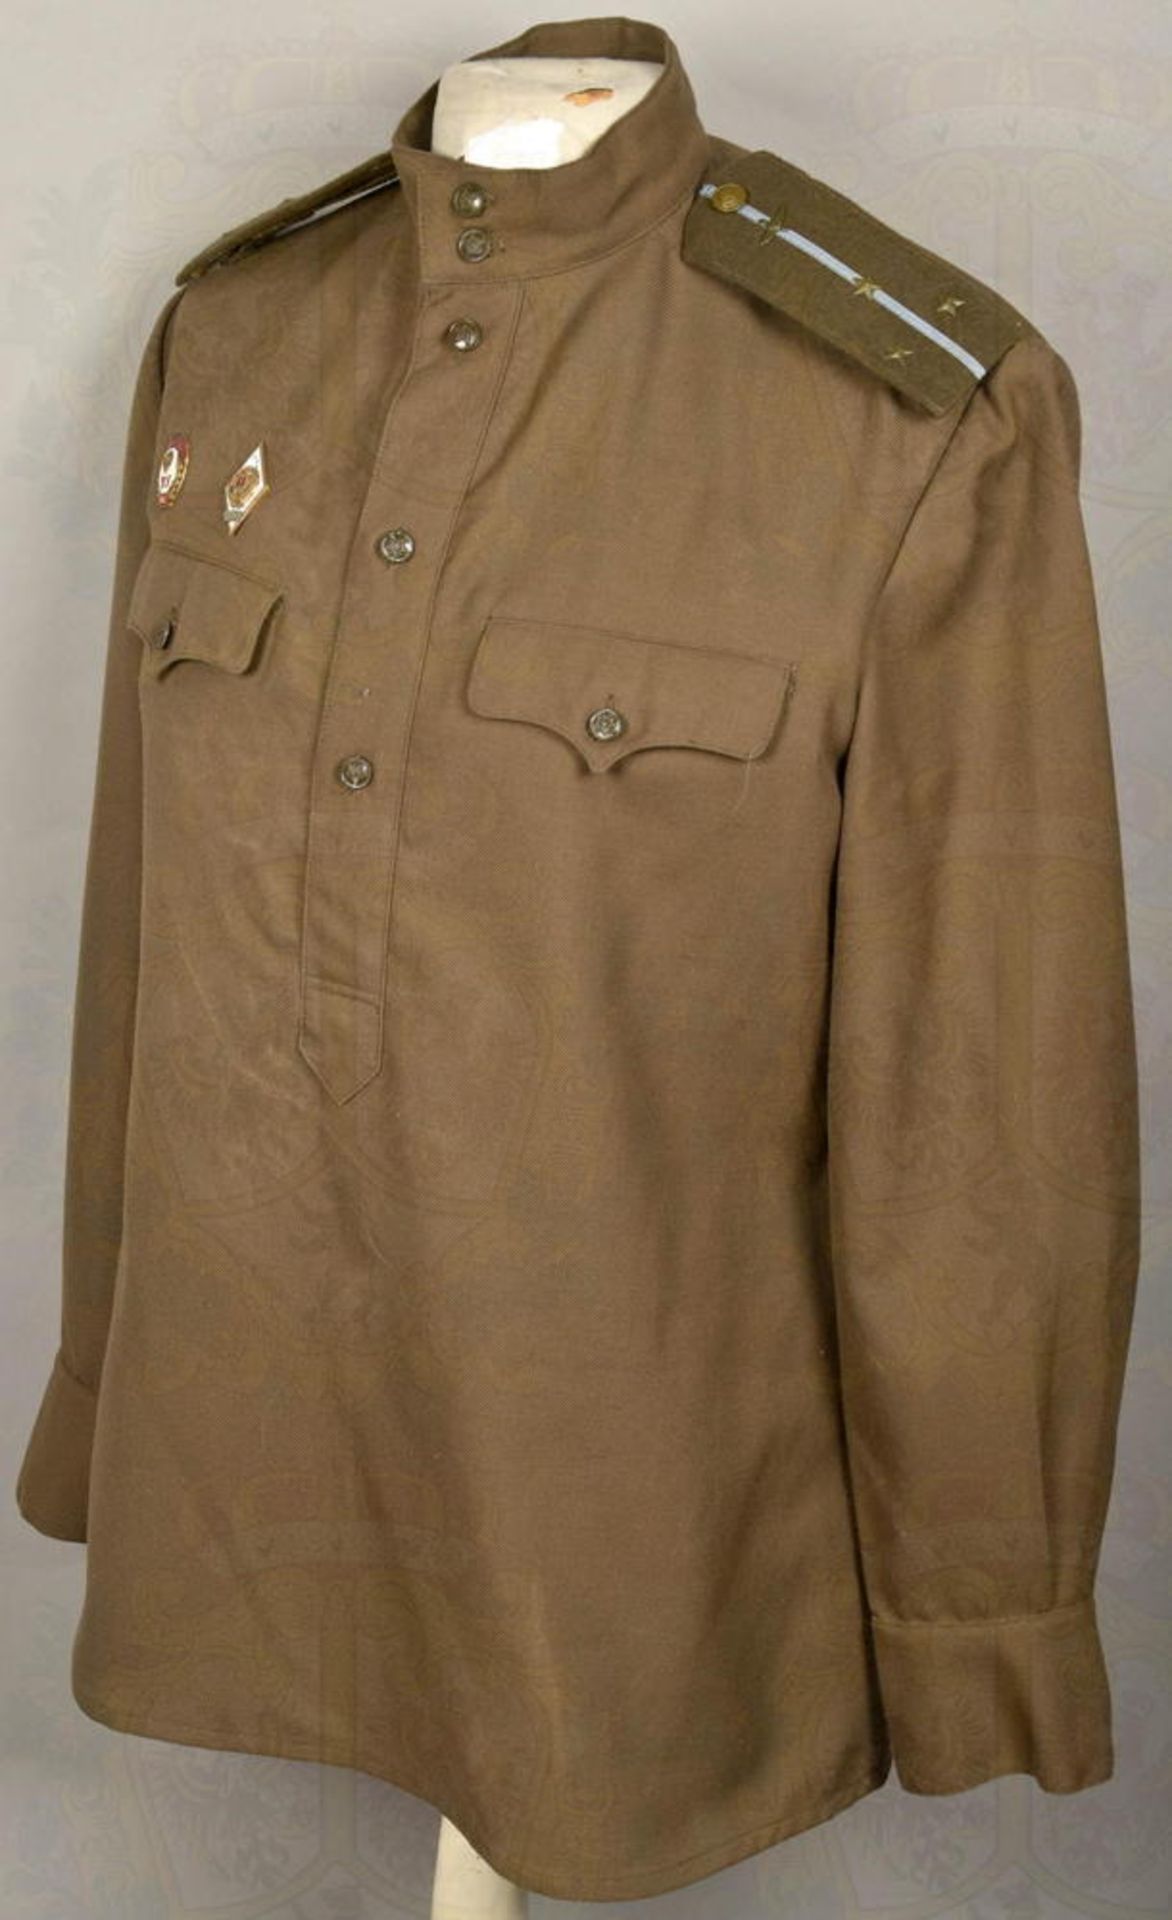 Offiziersbluse Modell 1943